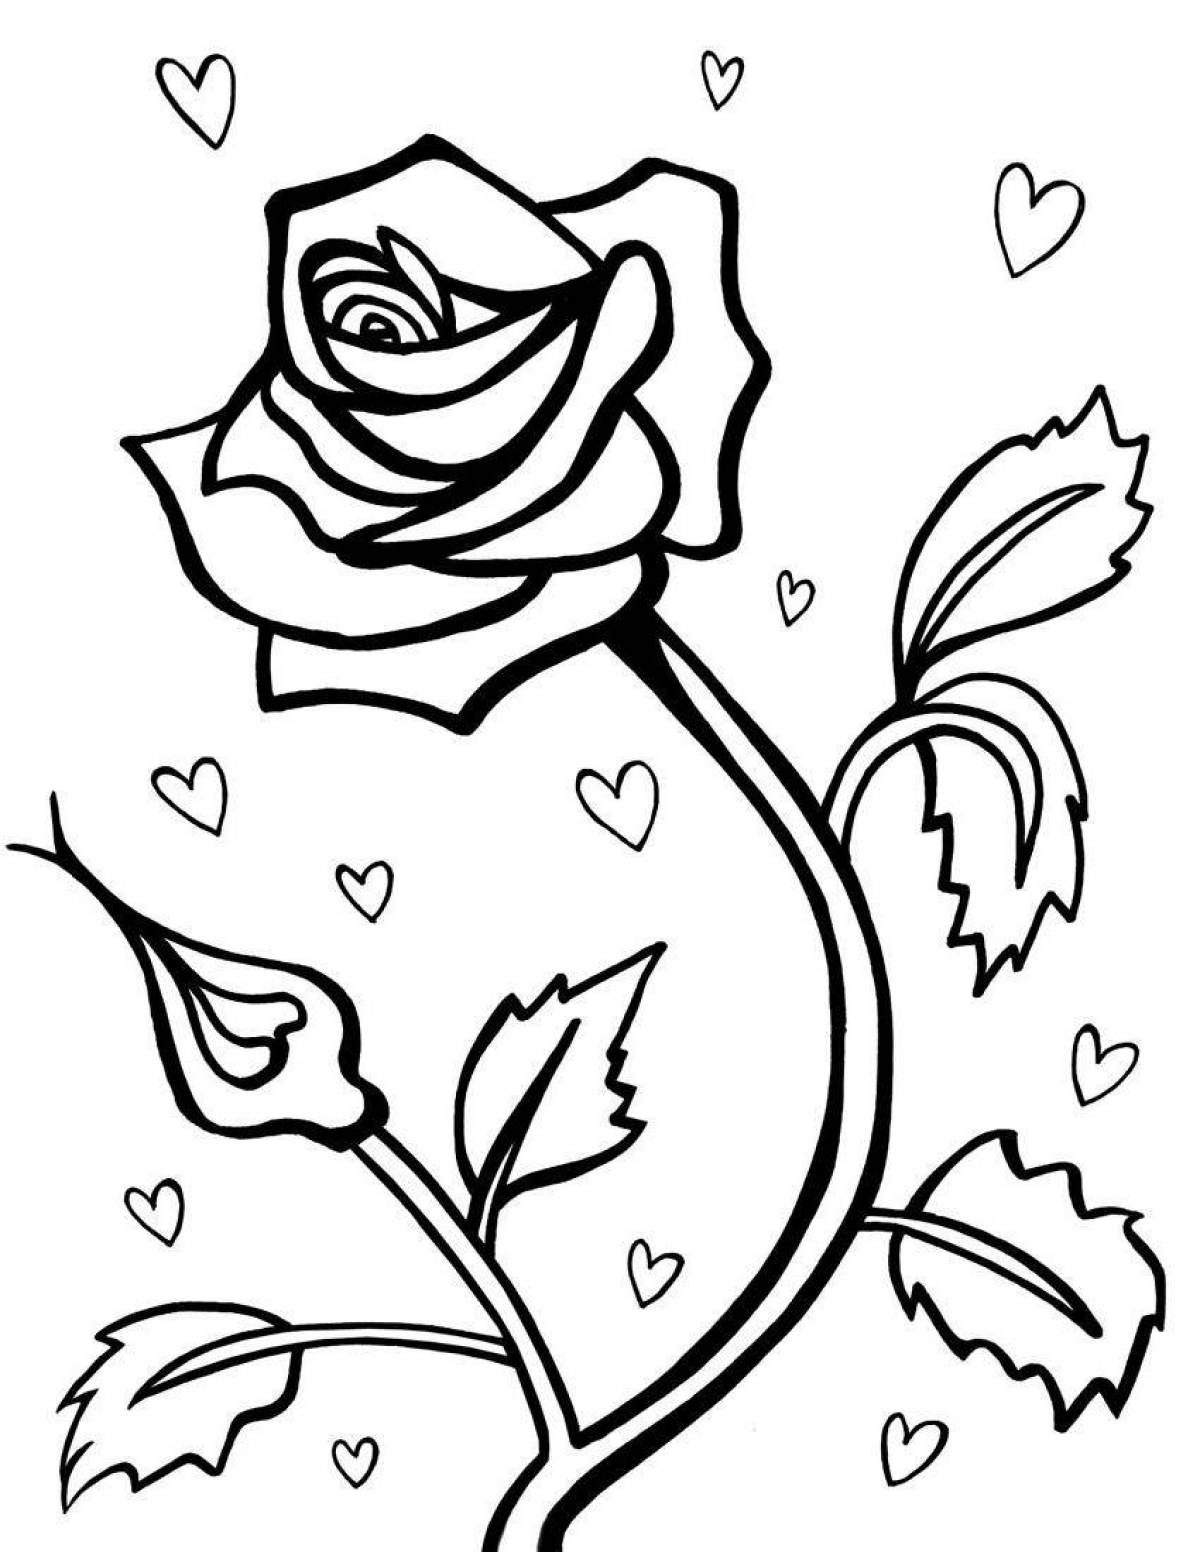 Gorgeous rose coloring book for girls